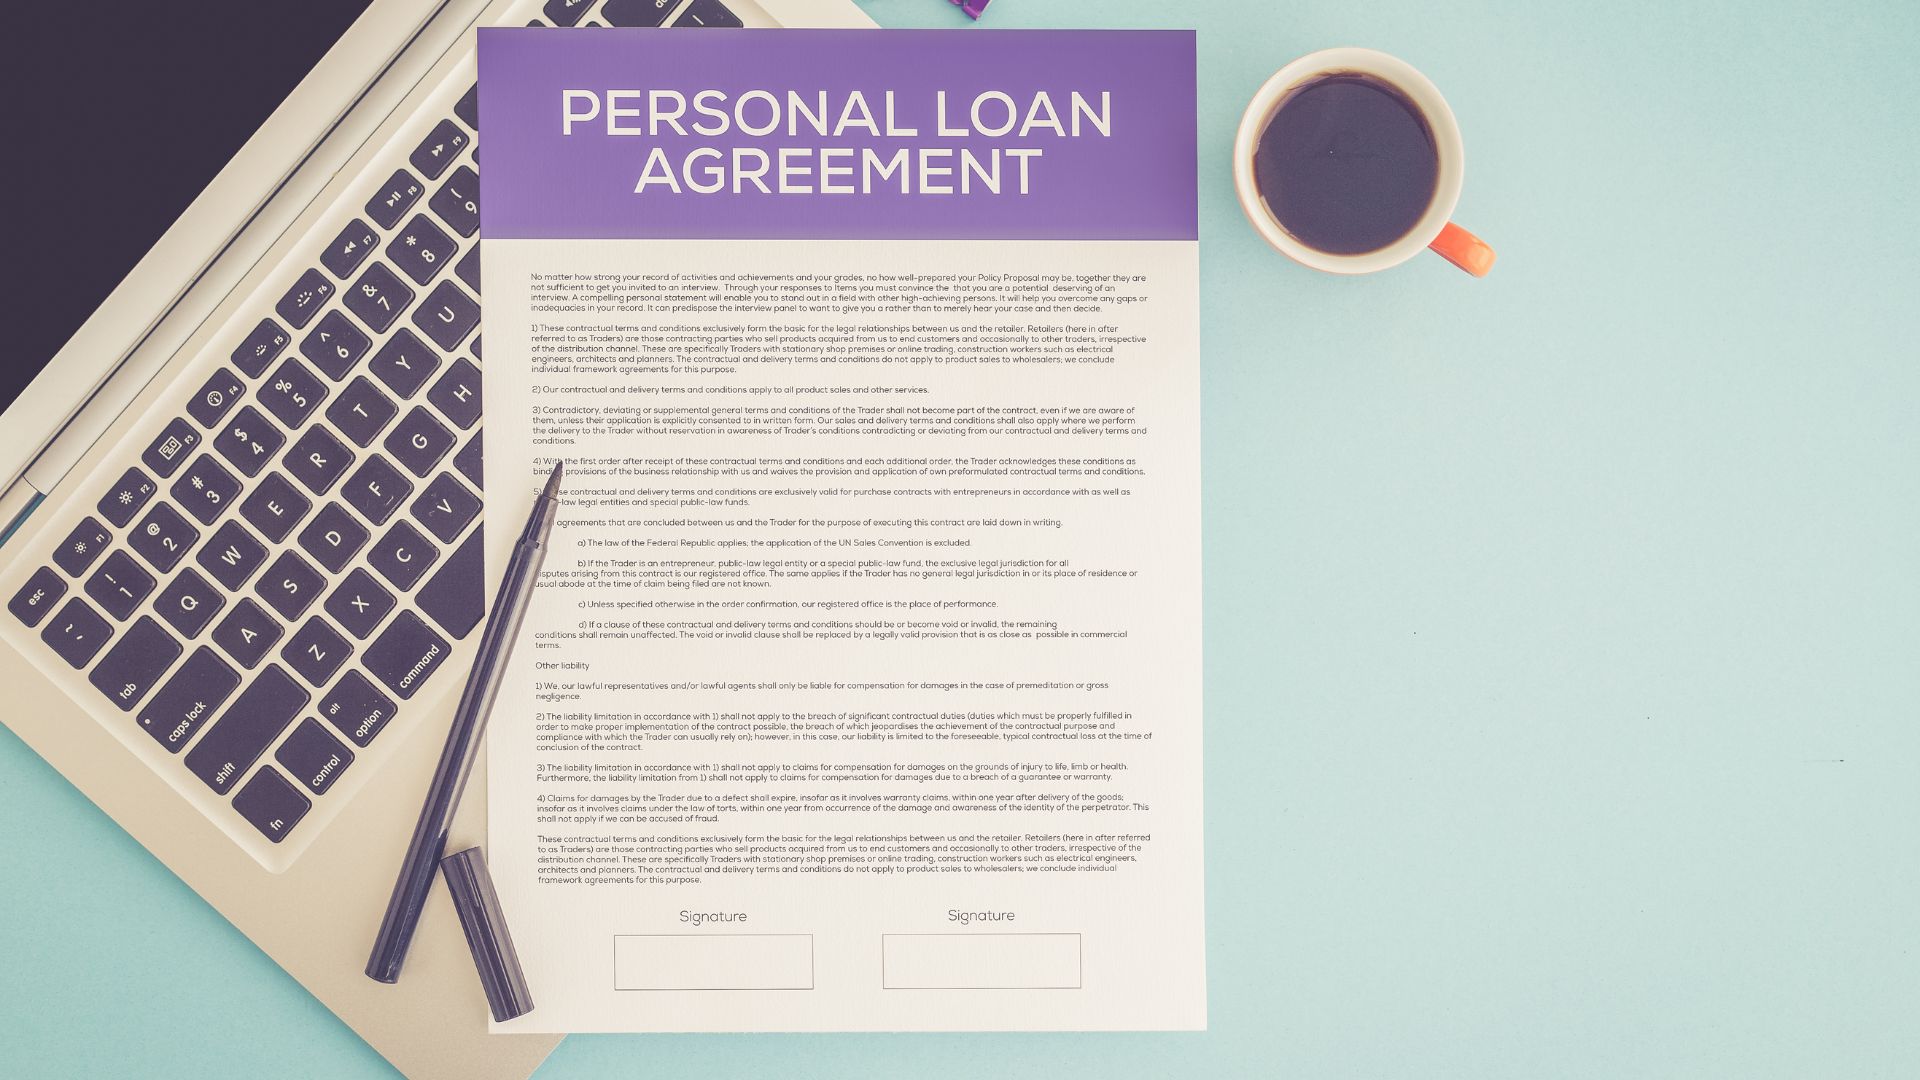 Expanding Personal Loan Options Through Online Lenders